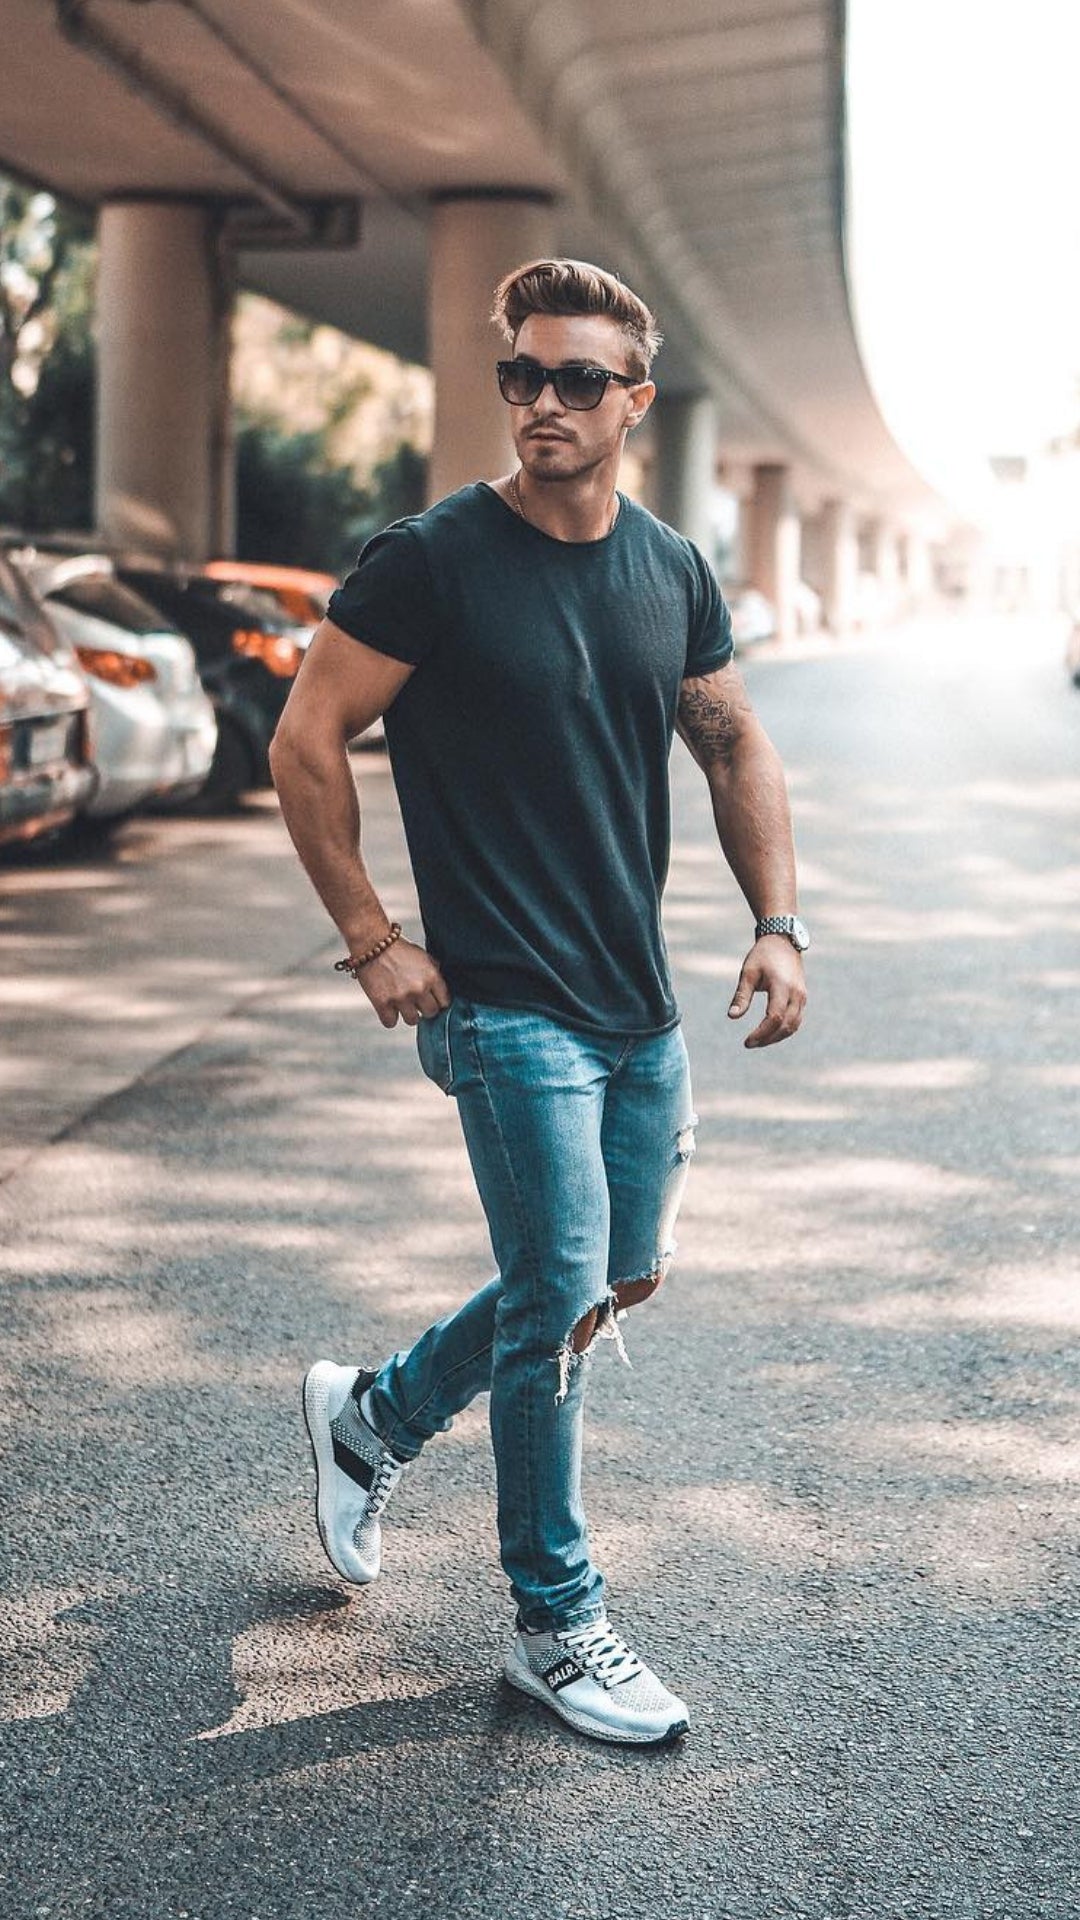 If You Like Street Style, Try These Outfit Ideas #streetstyle #mensfashion